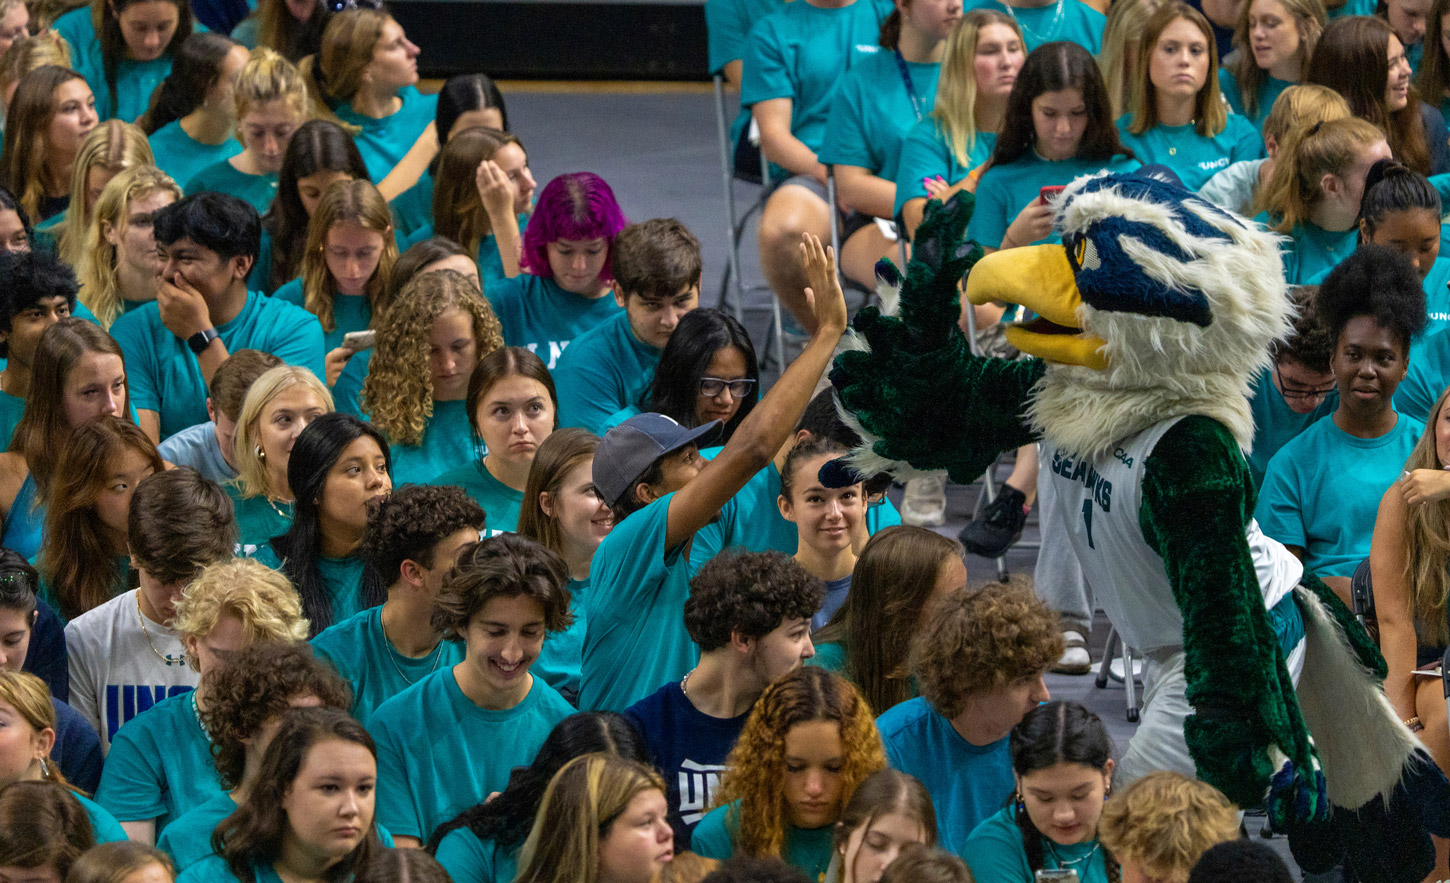 Our mascot Sammy high fives a student